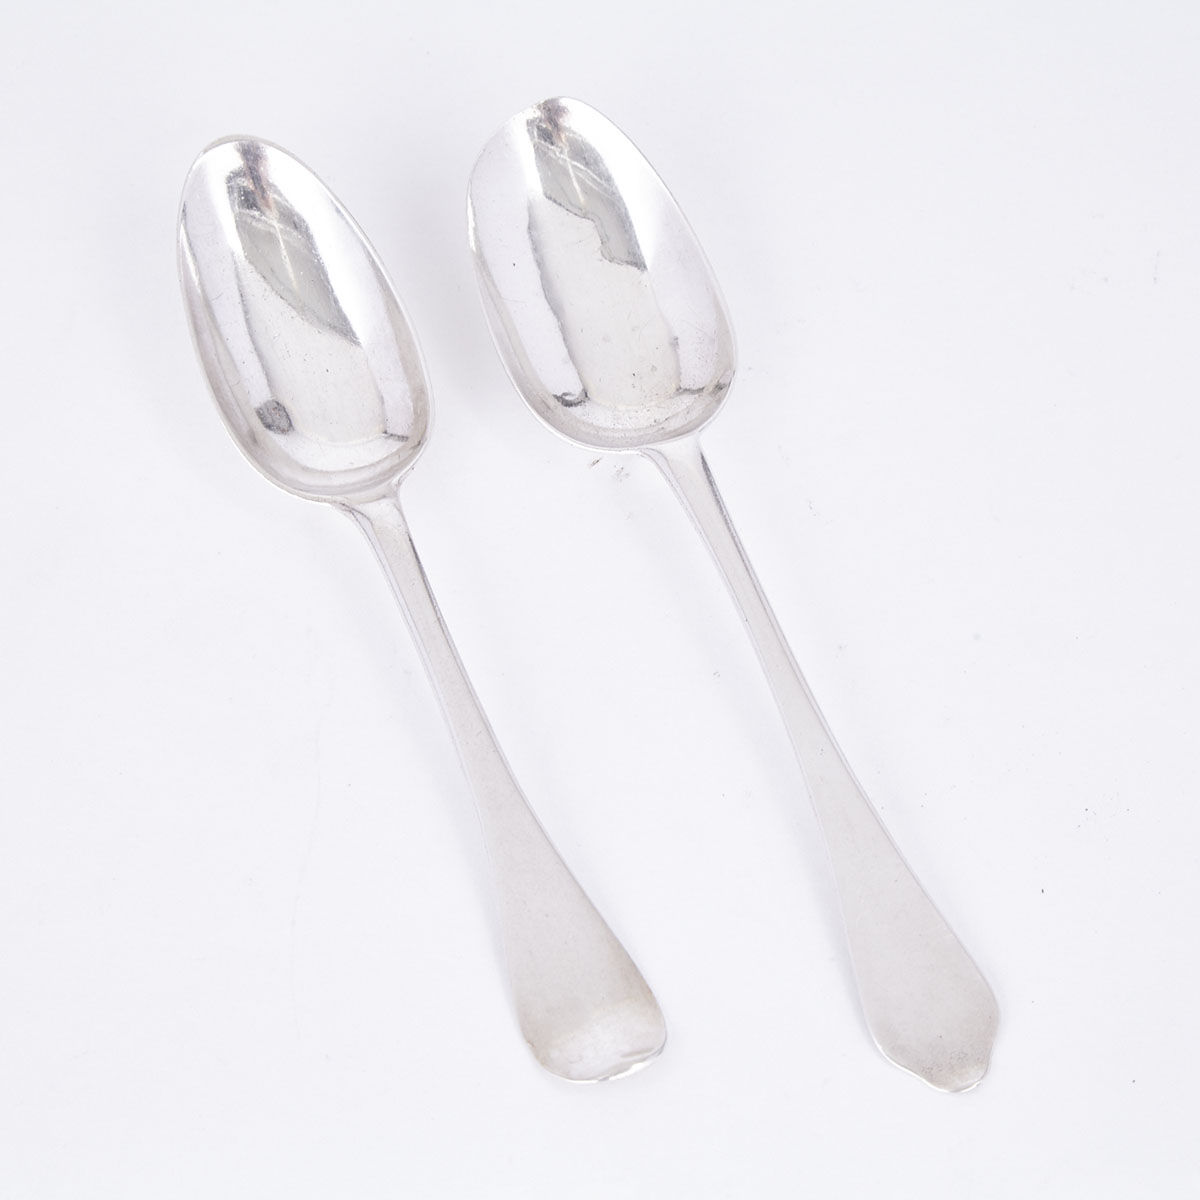 Two Continental Silver Spoons, 18th century